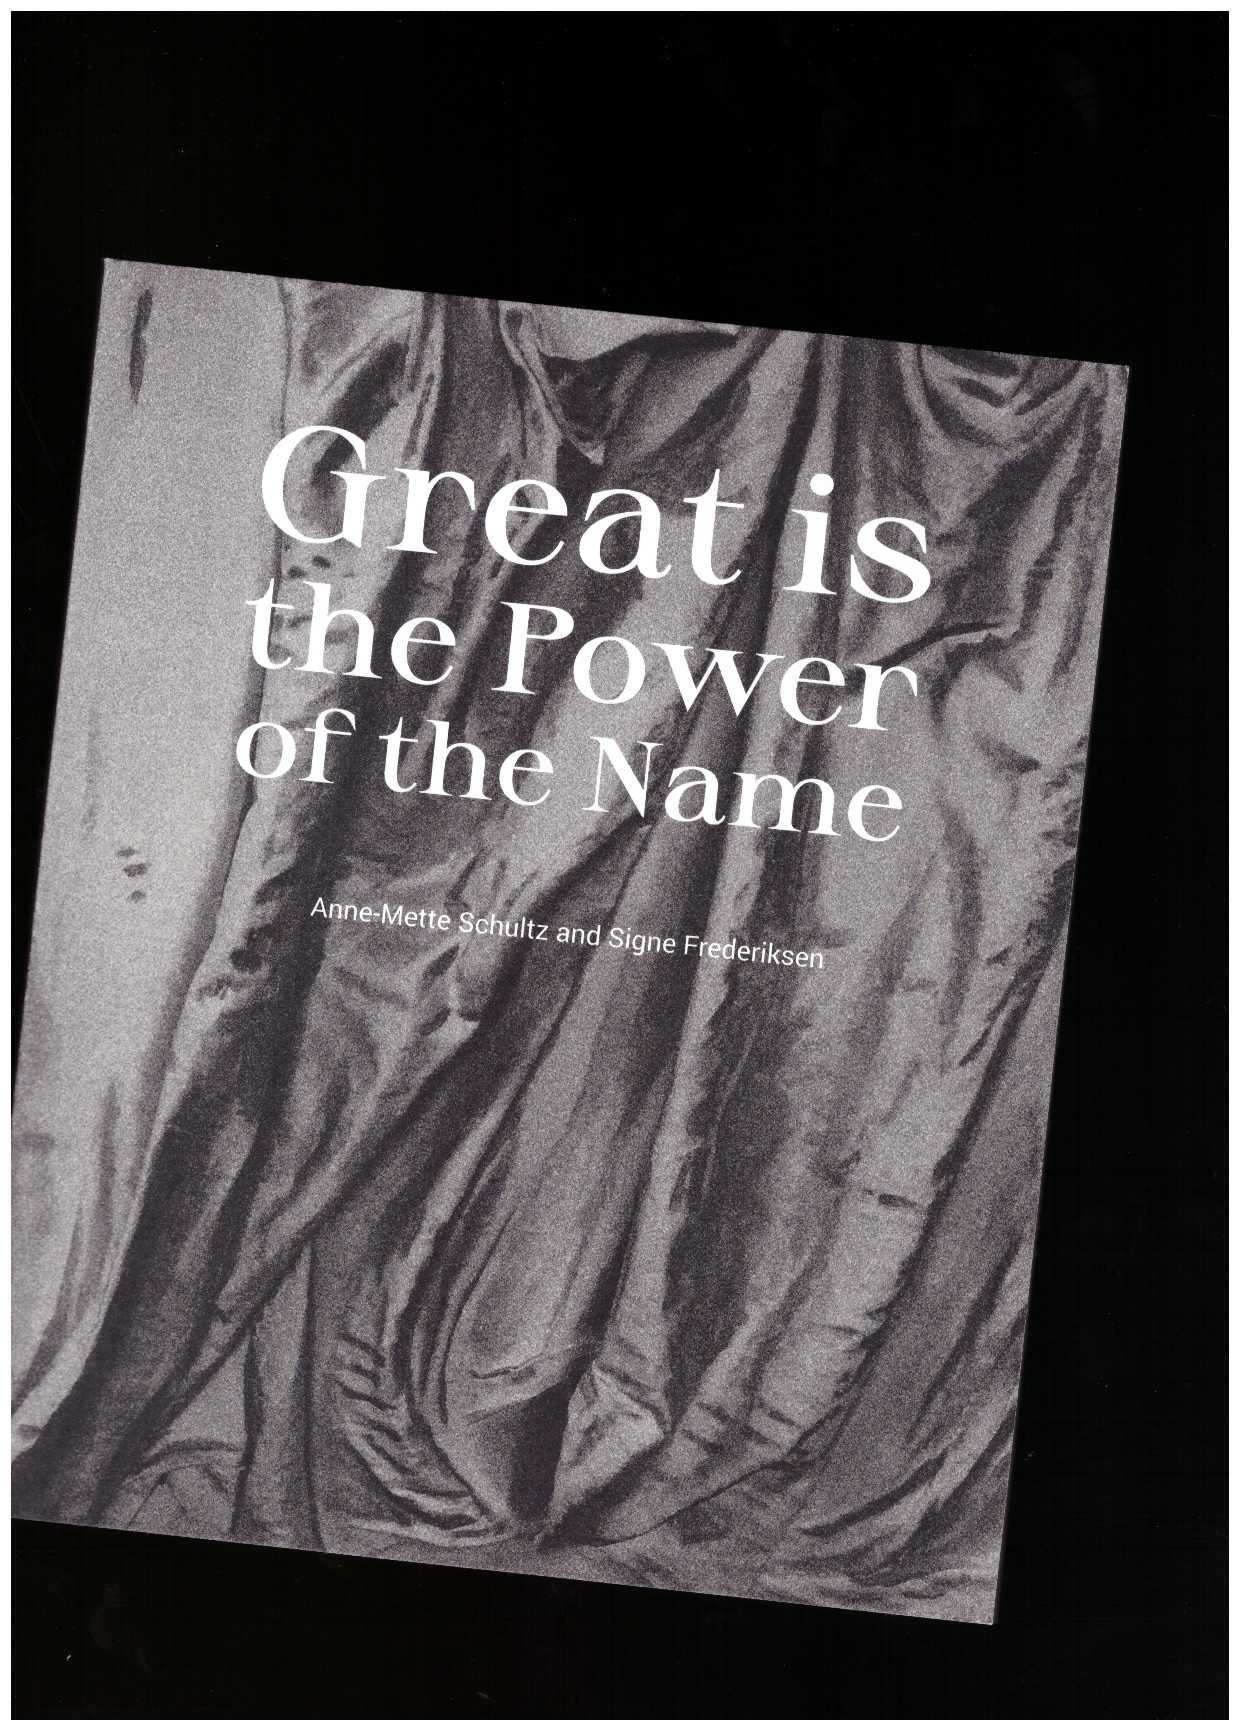 FREDERIKSEN, Signe; SCHULTZ, Anne Mette - Great is the Power of the Name